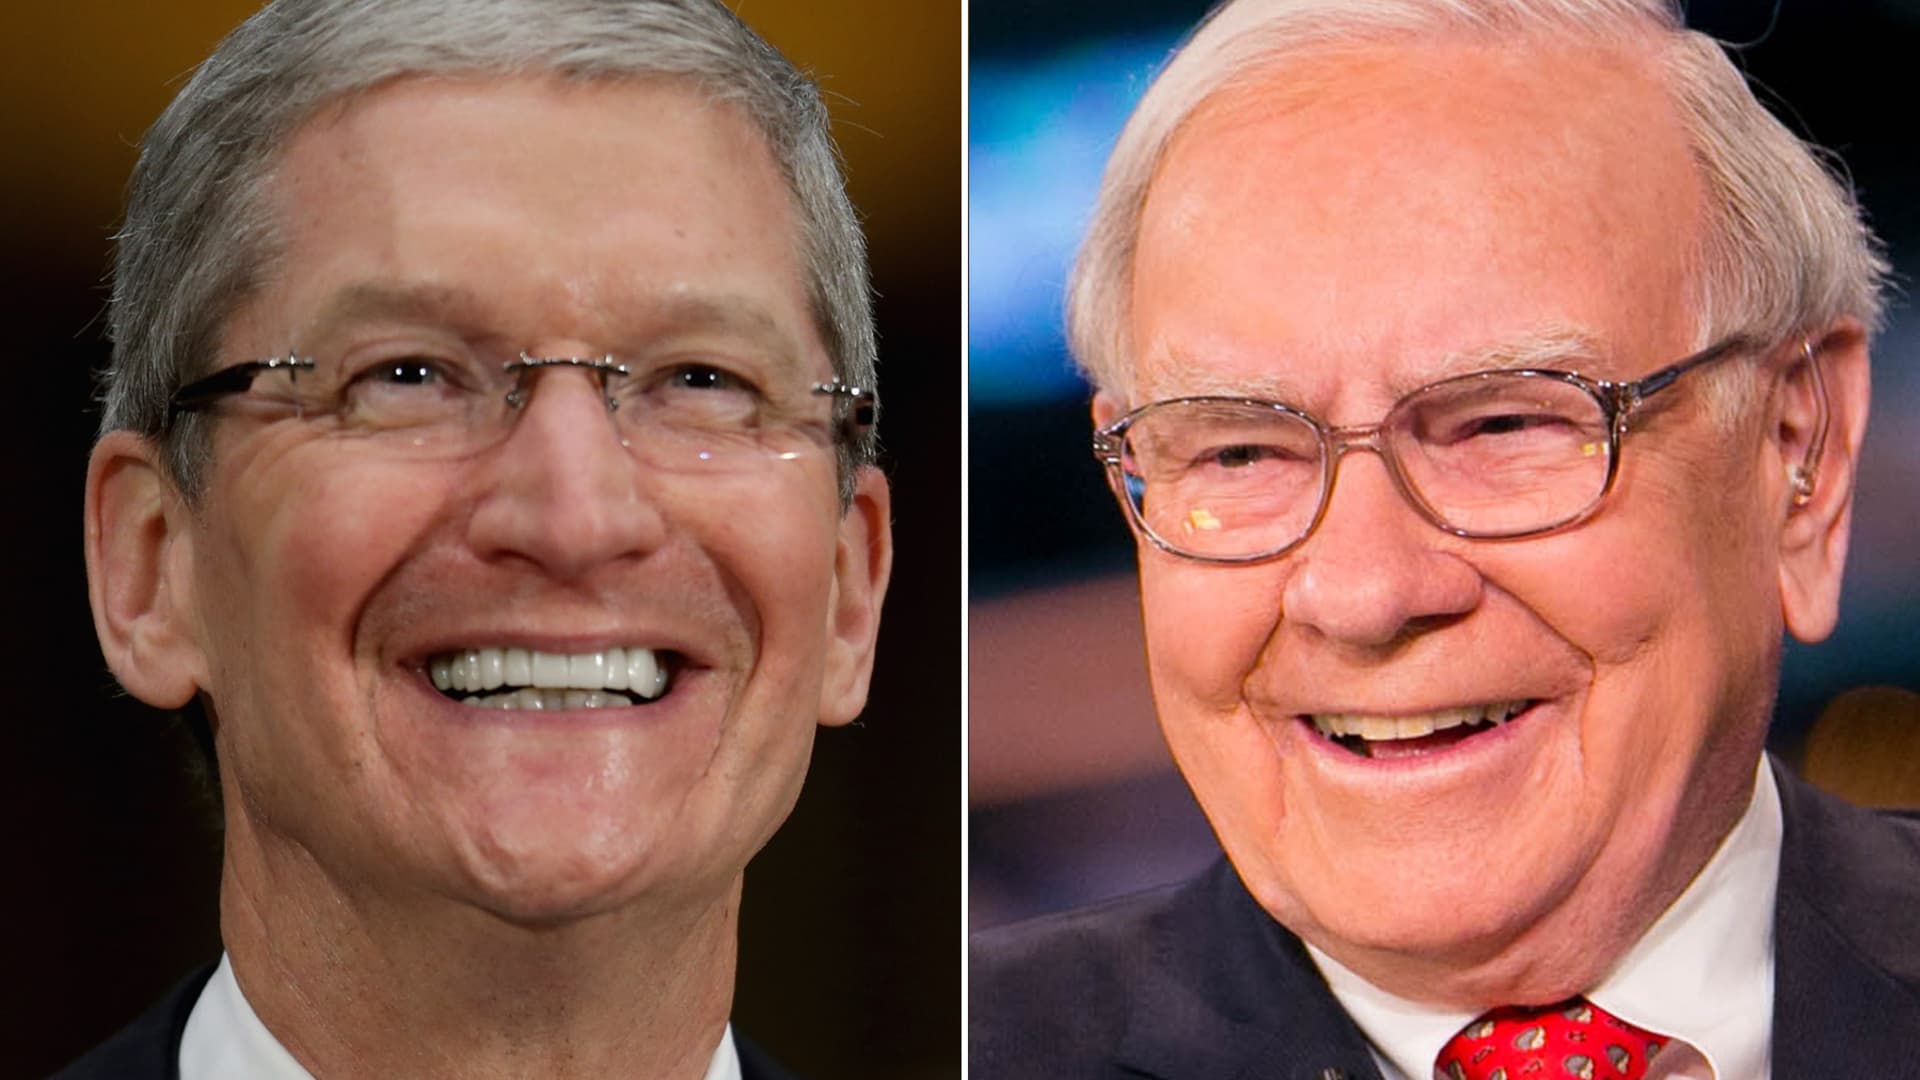 Apple remains Buffett’s biggest public stock holding, but his thesis about its moat faces questions